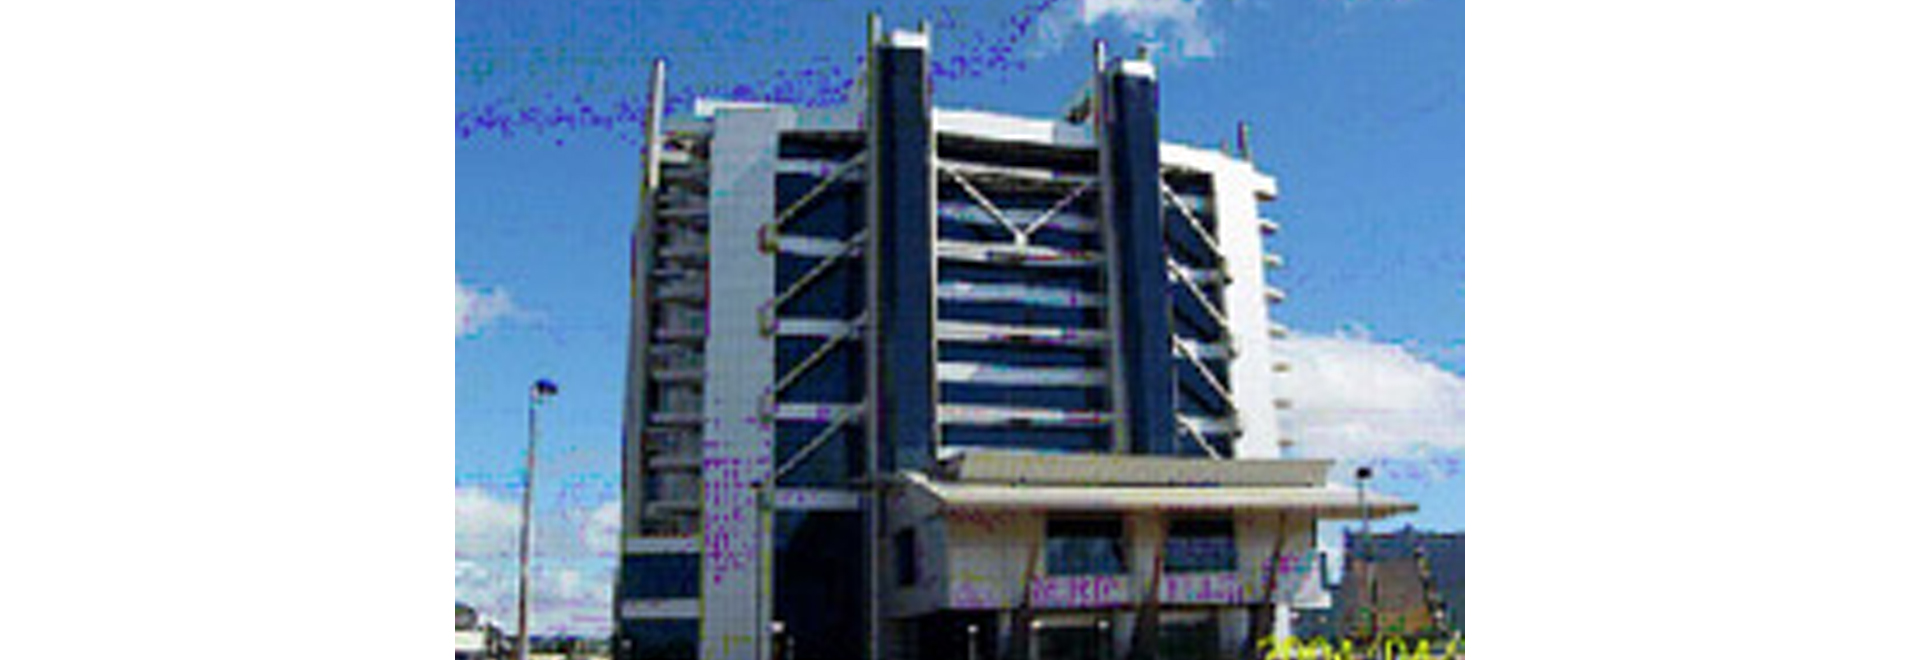 Ebene Cyber Tower, Business Parks of Mauritius Limited